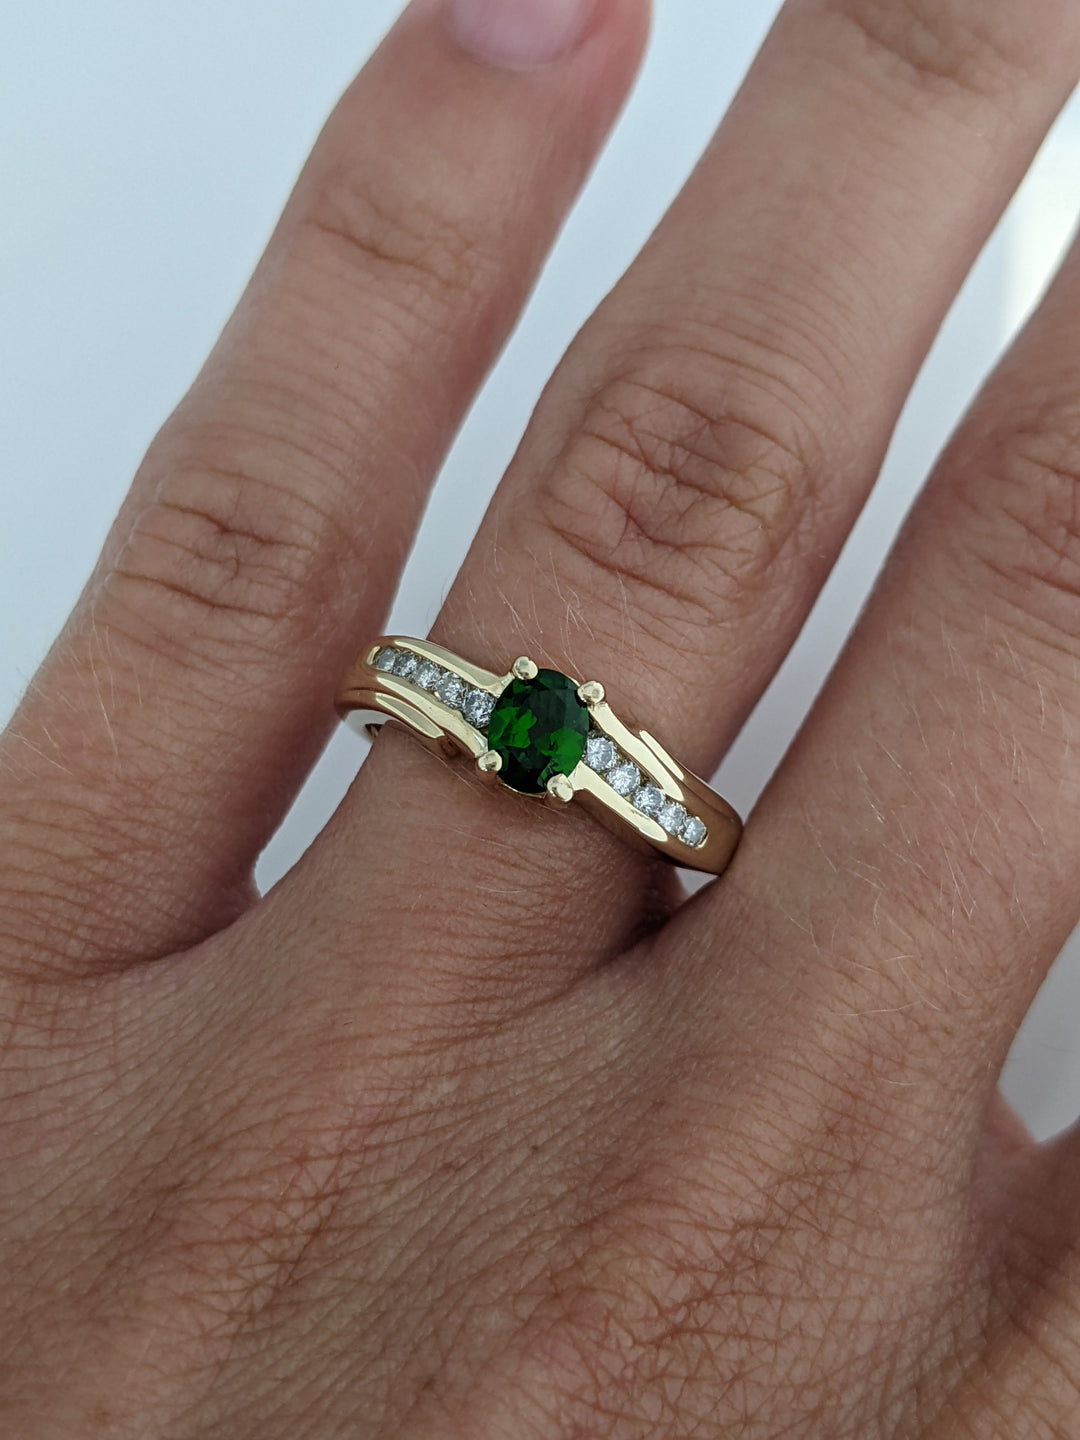 10K GREEN TOURMALINE OVAL 3X4 WITH 10 MELEE DIAMOND ESTATE RING 2.6 GRAMS